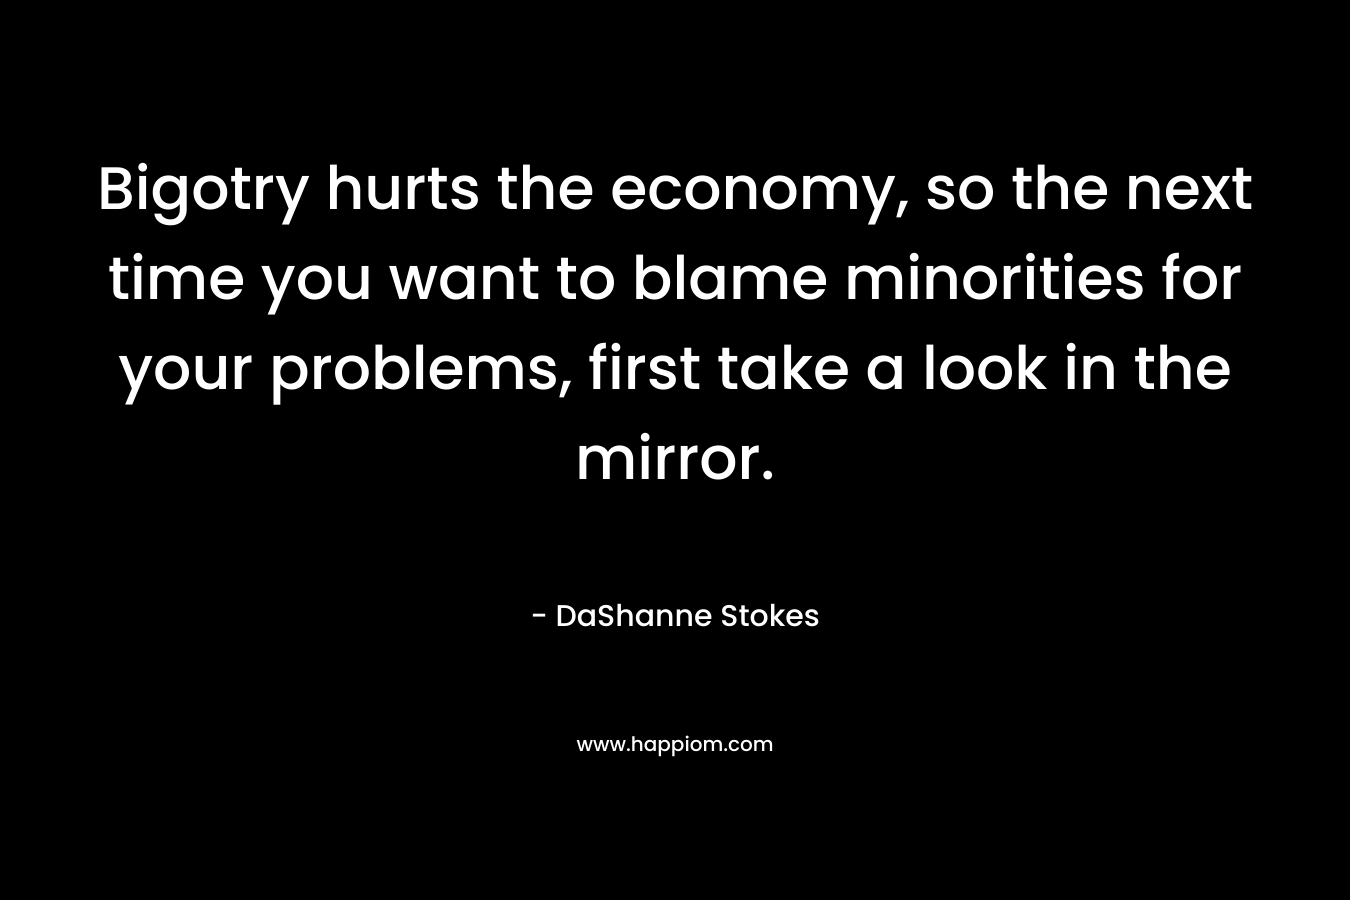 Bigotry hurts the economy, so the next time you want to blame minorities for your problems, first take a look in the mirror. – DaShanne Stokes